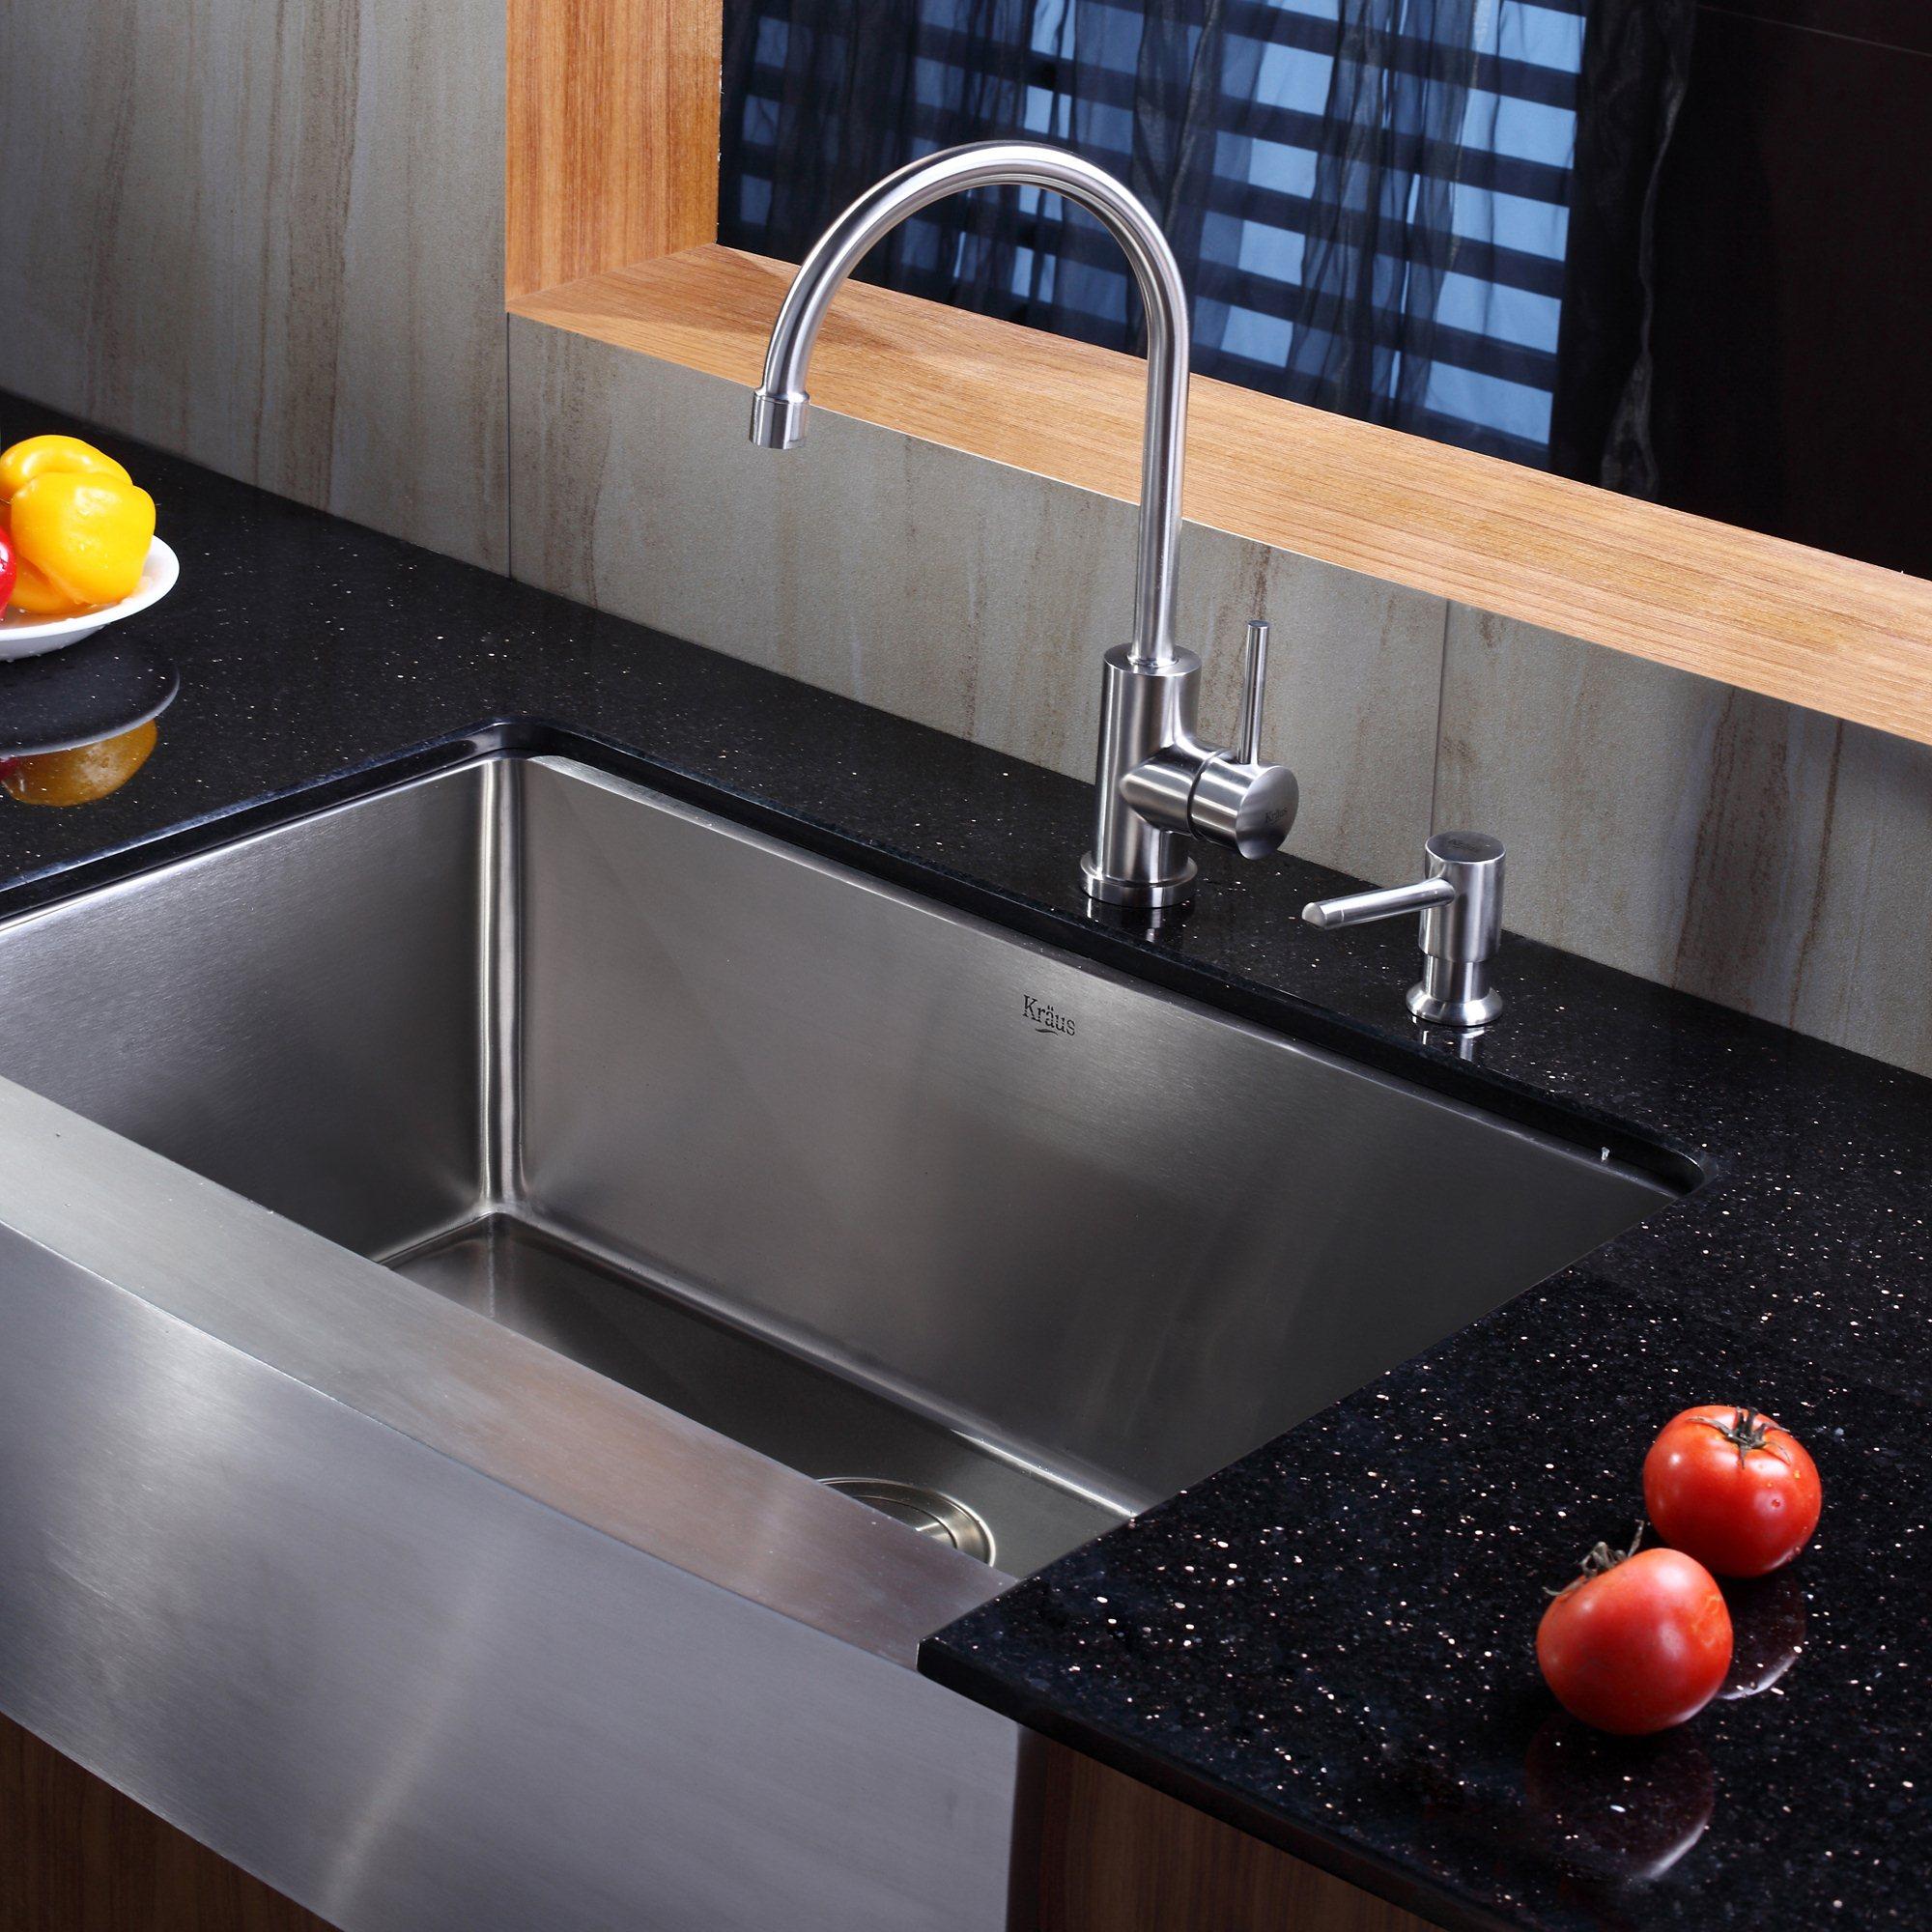 https://ak1.ostkcdn.com/images/products/4389926/Kraus-Kitchen-Combo-Set-Stainless-Steel-30-inch-Farmhouse-Sink-with-Faucet-58c99479-9801-4f65-9582-987d8481bf4b.jpg